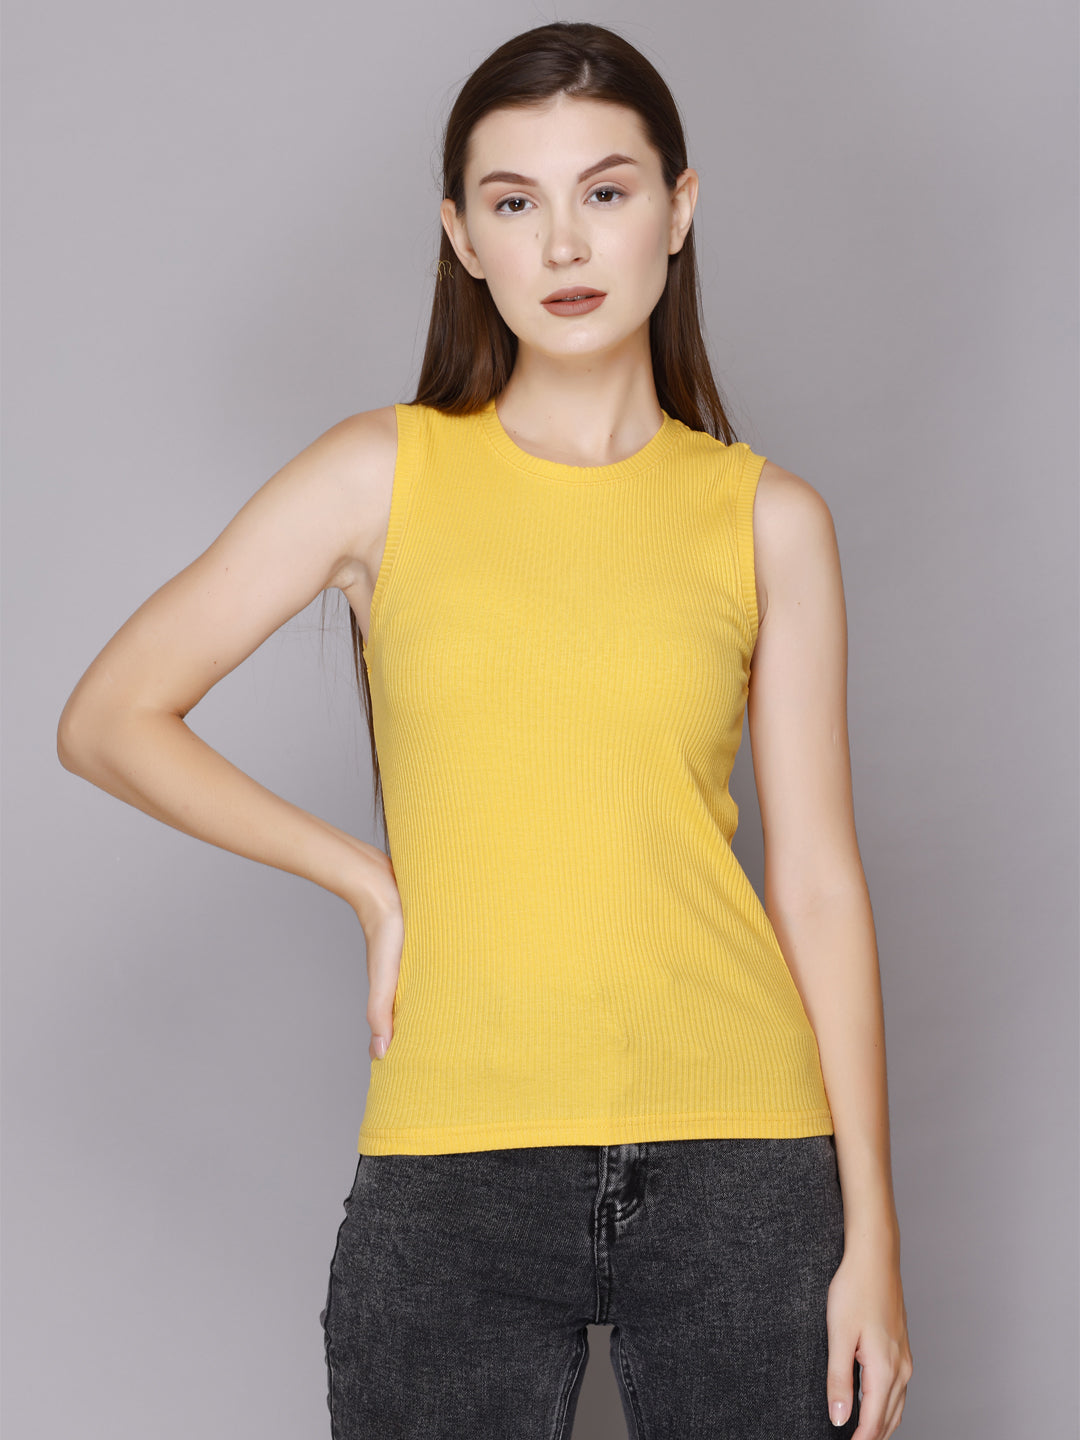 Stylish Modish Rib Tank Top For Women Online At Best Prices